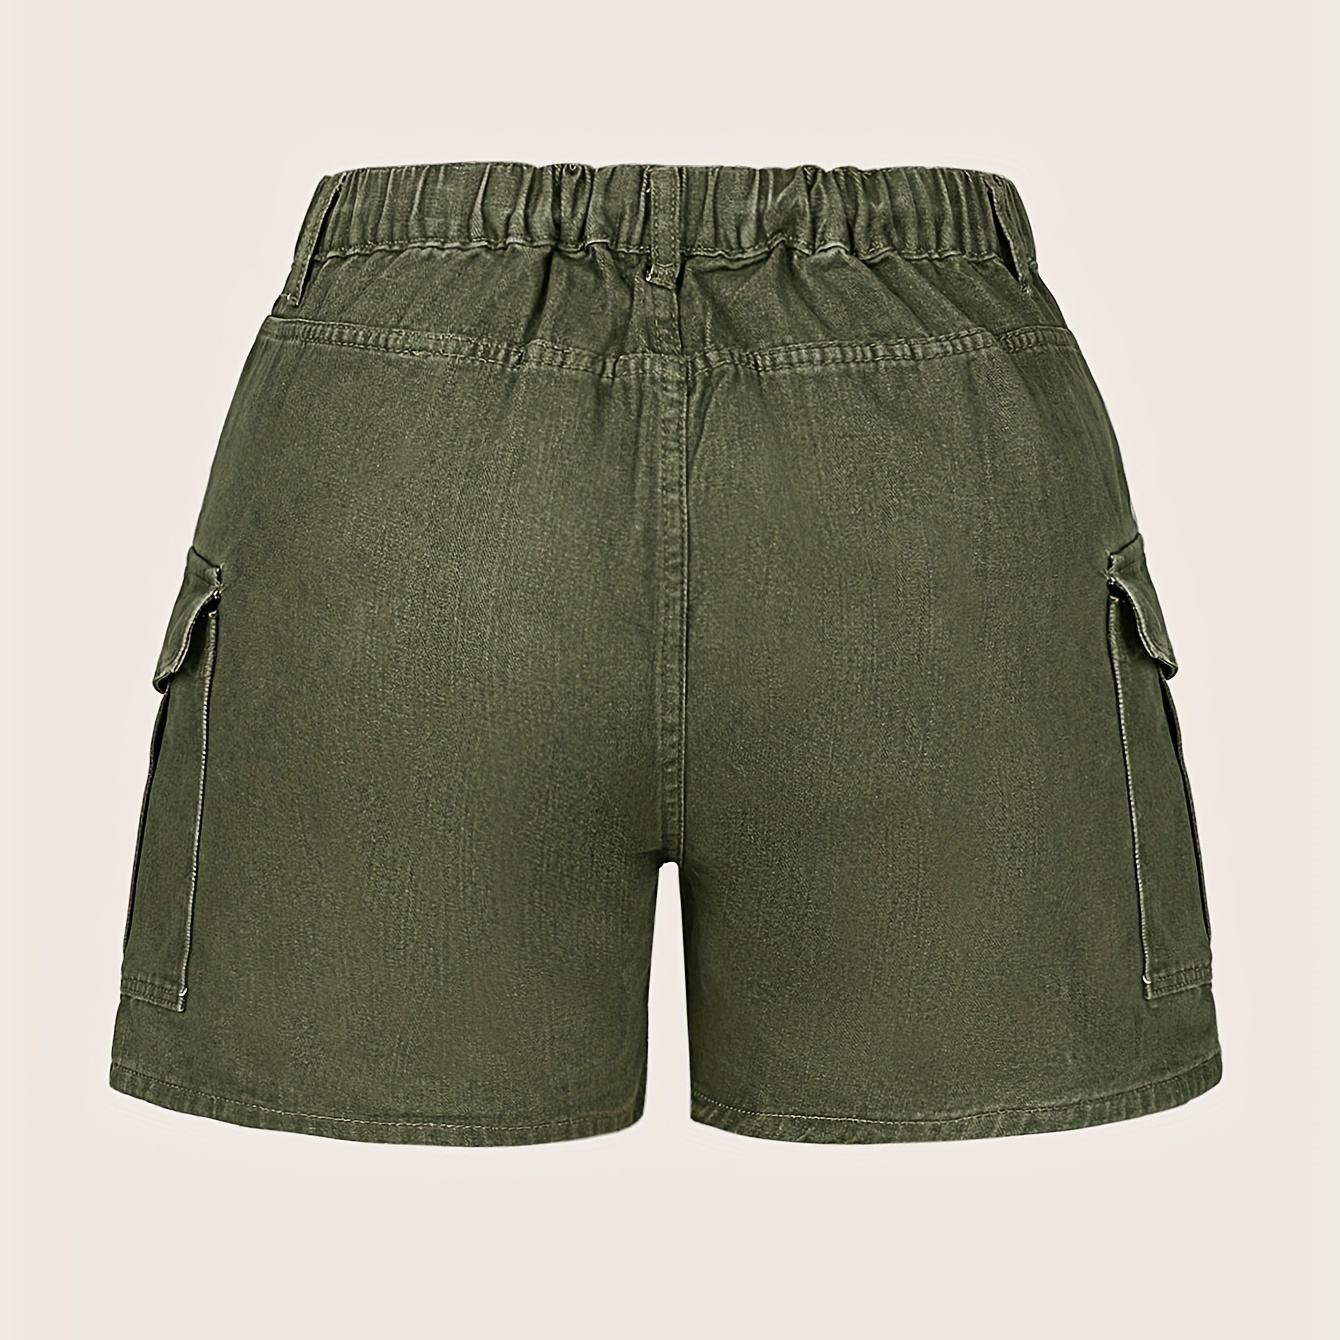 

Plus Size Elegant Plain Green Cargo Shorts, Casual Style, Fashion Trend, Women's Summer Bottoms, Outdoor Shorts, Pocket Details, Comfort Fit